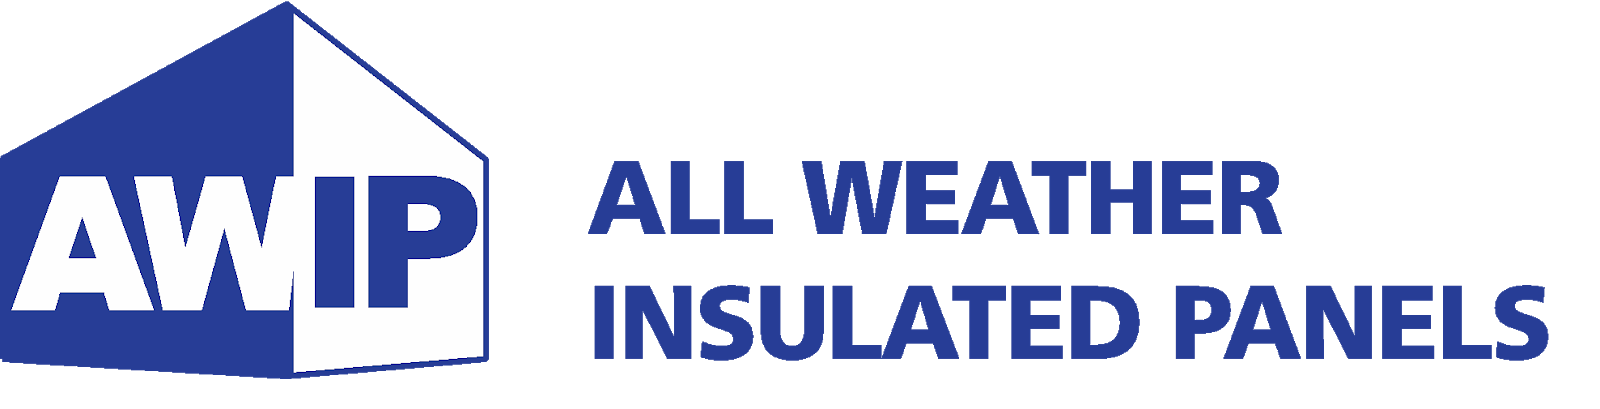 All Weather Insulated Panels Announces Partnership with MTL Holdings